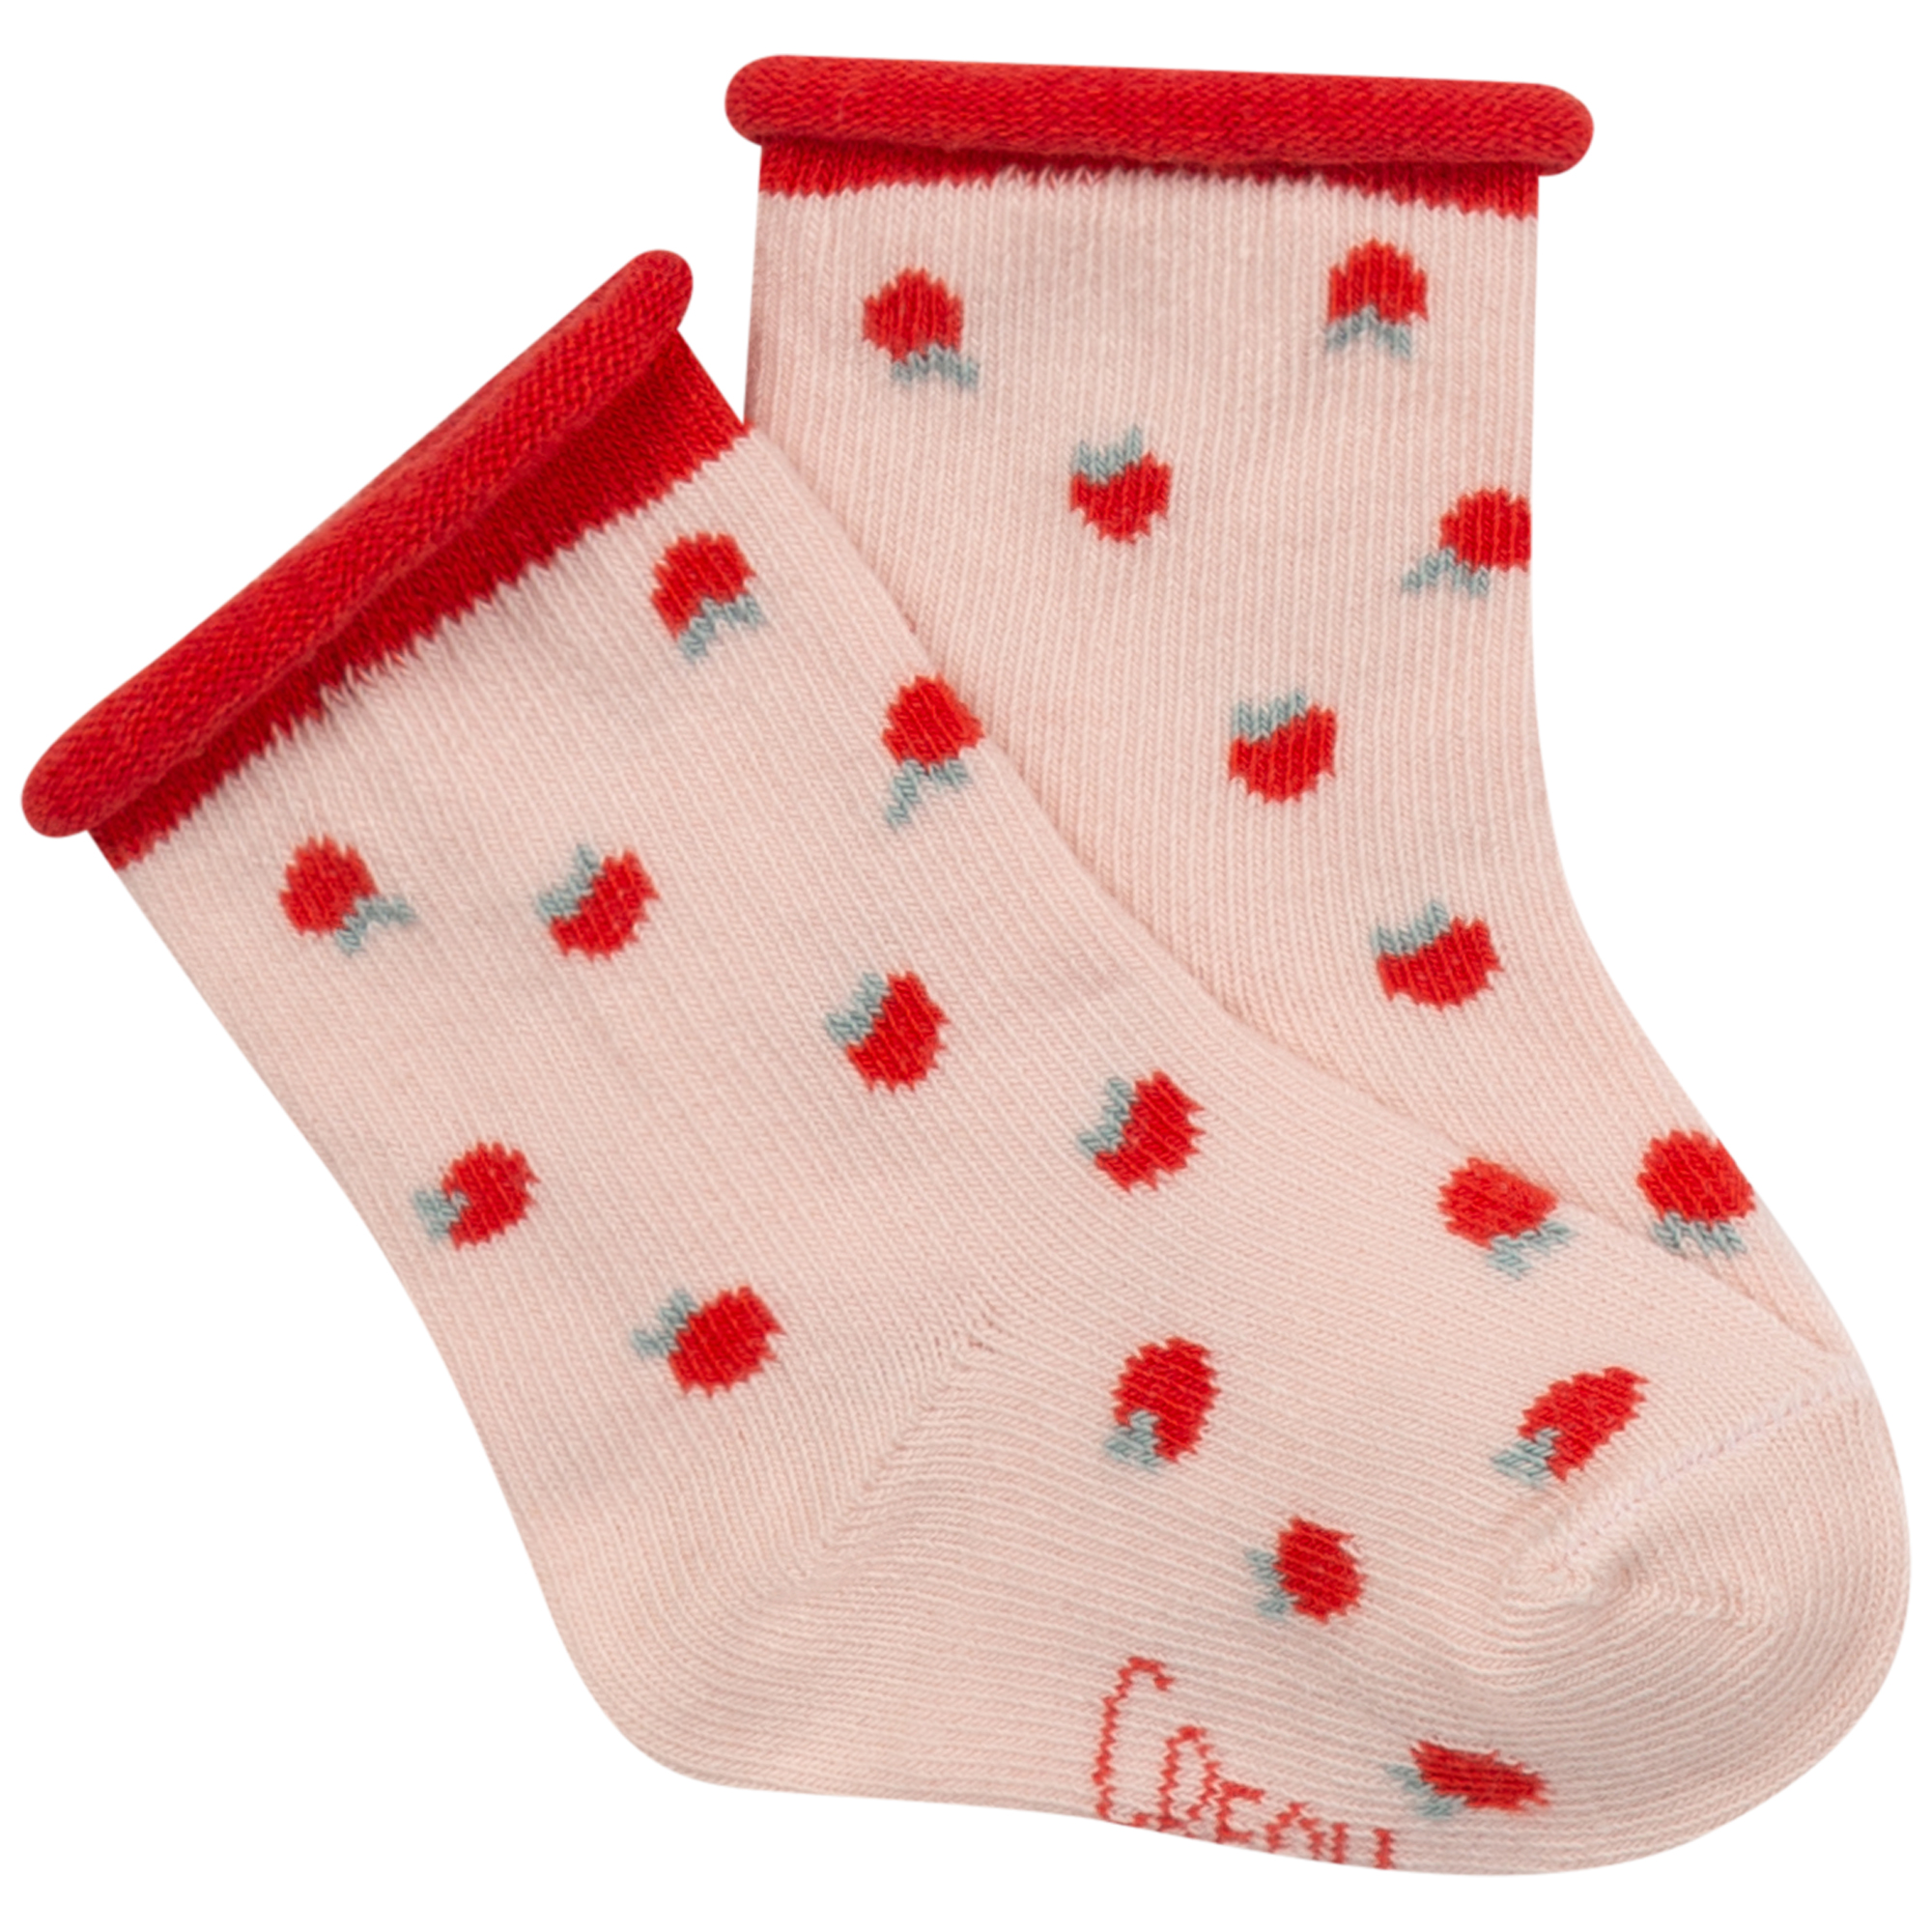 Printed cotton socks CARREMENT BEAU for GIRL